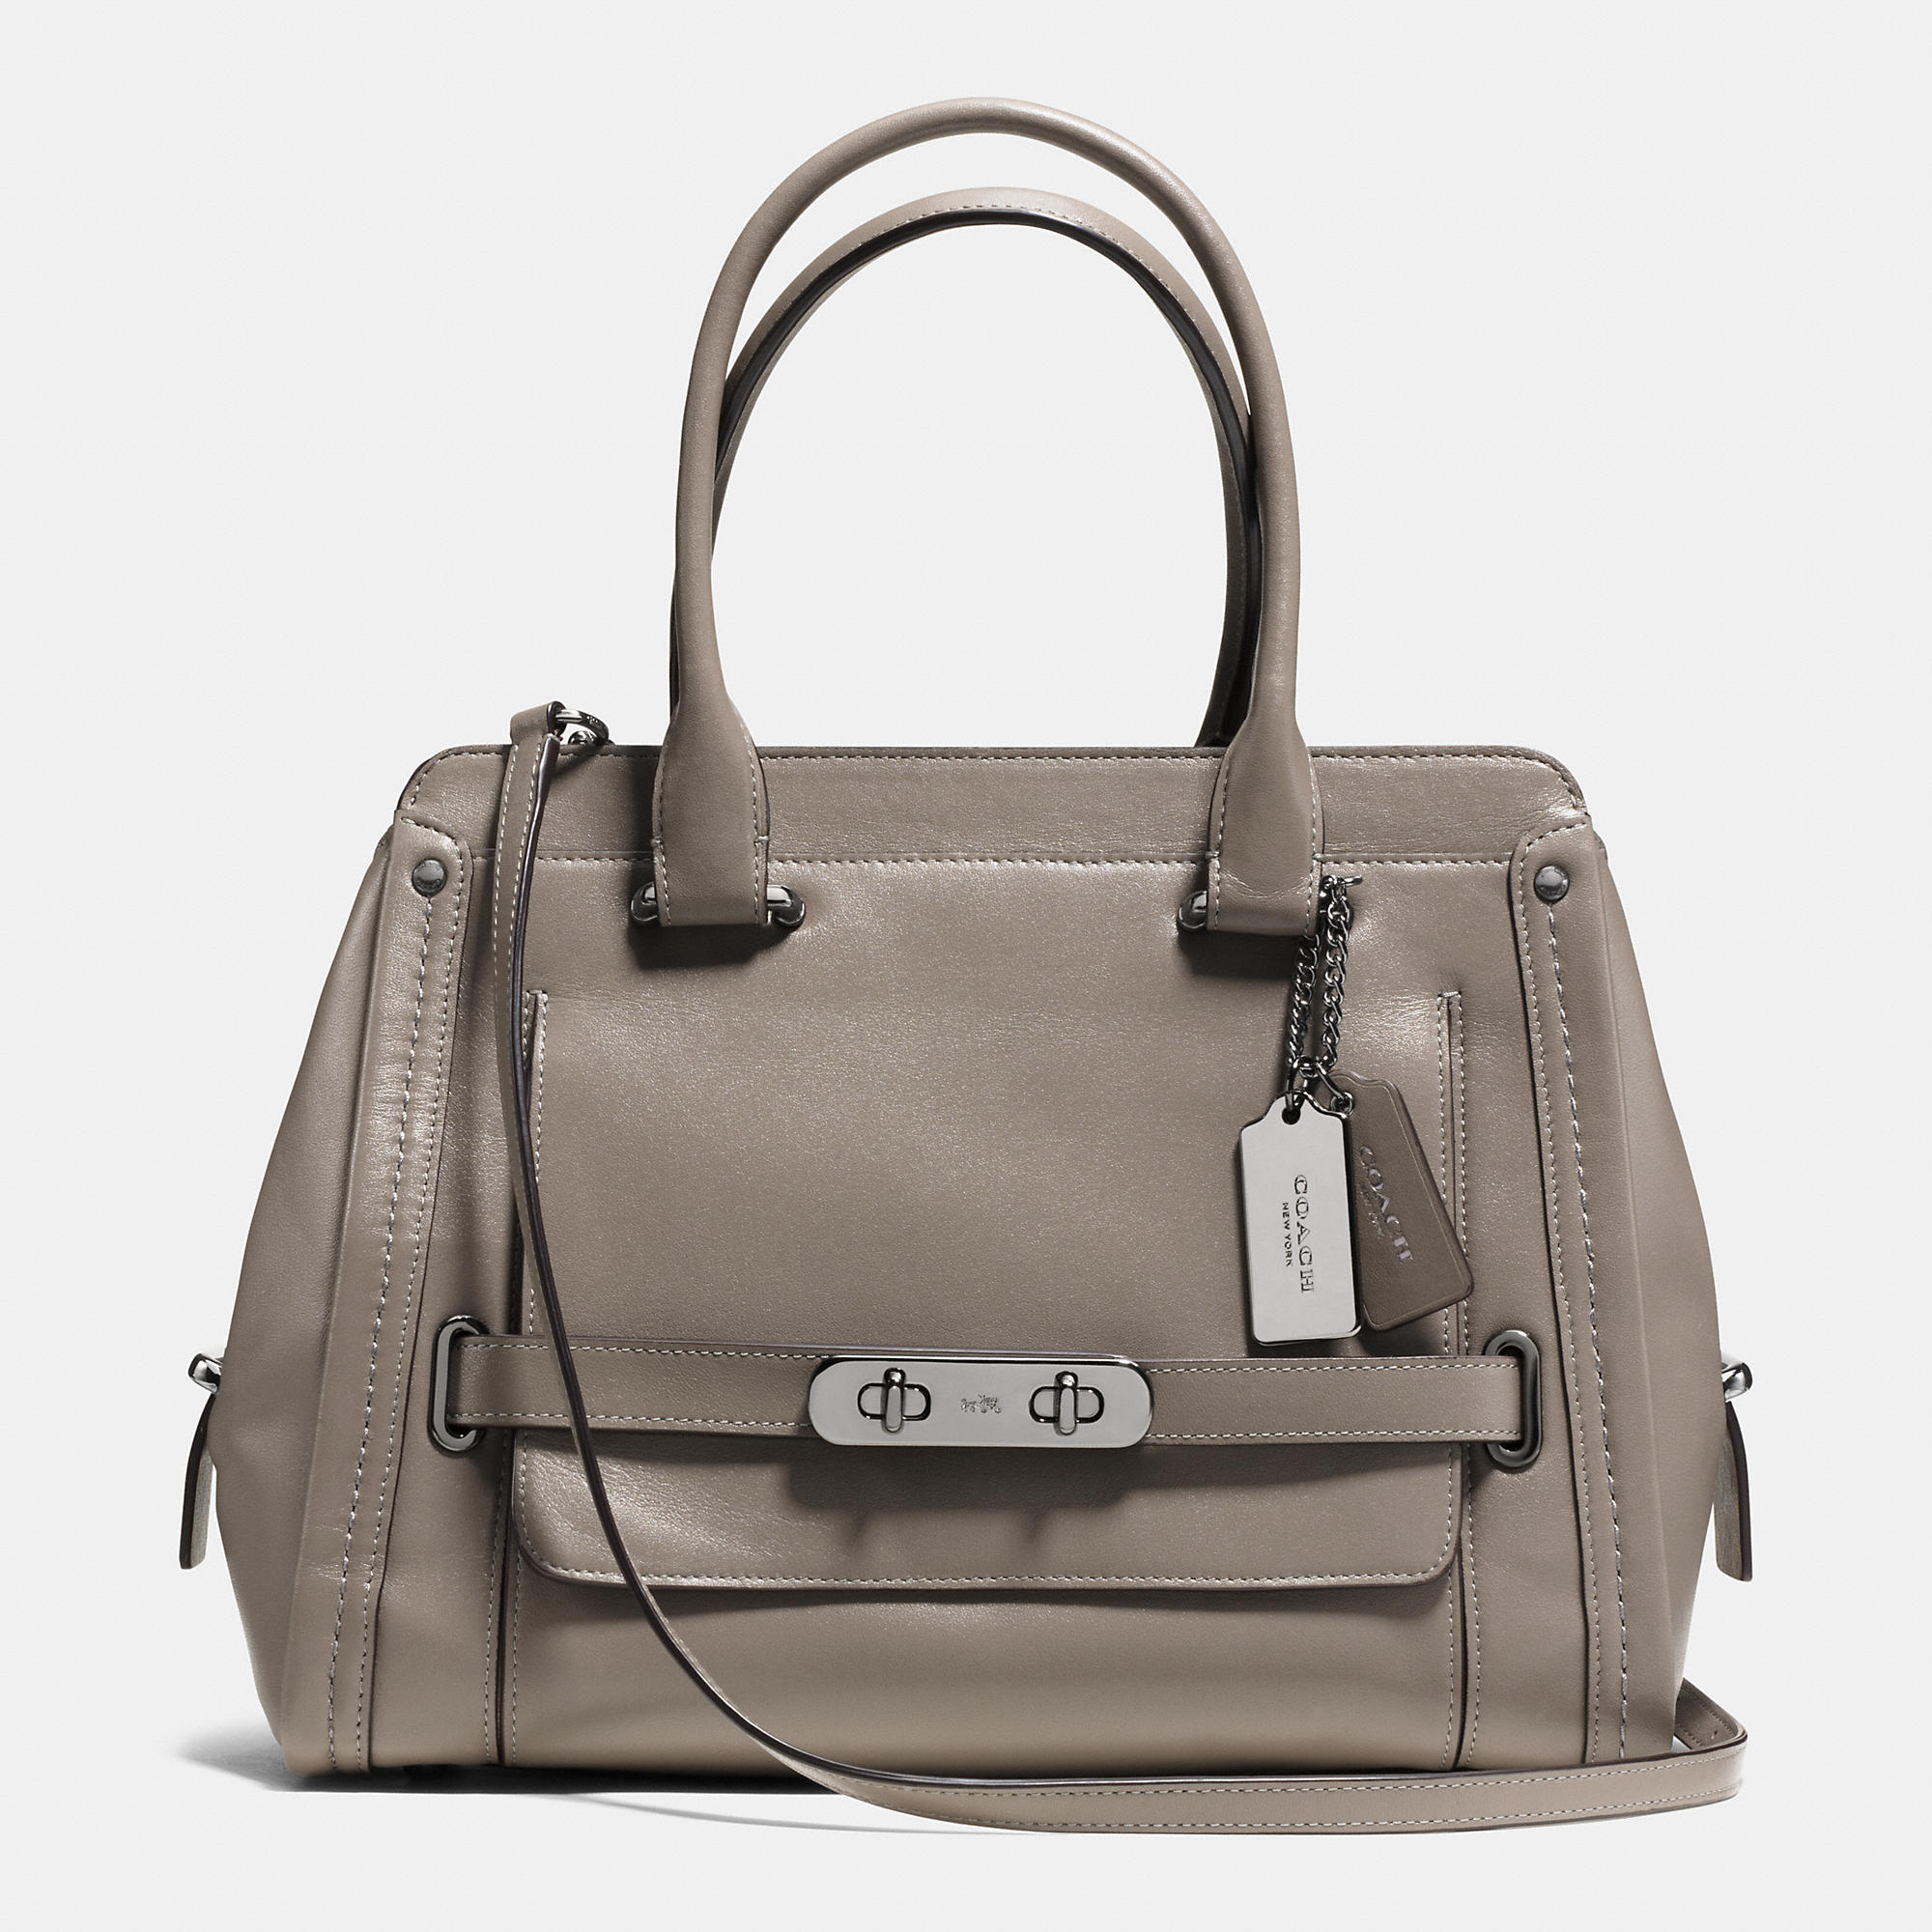 New Leather Coach Swagger Frame Satchel In Calf Leather